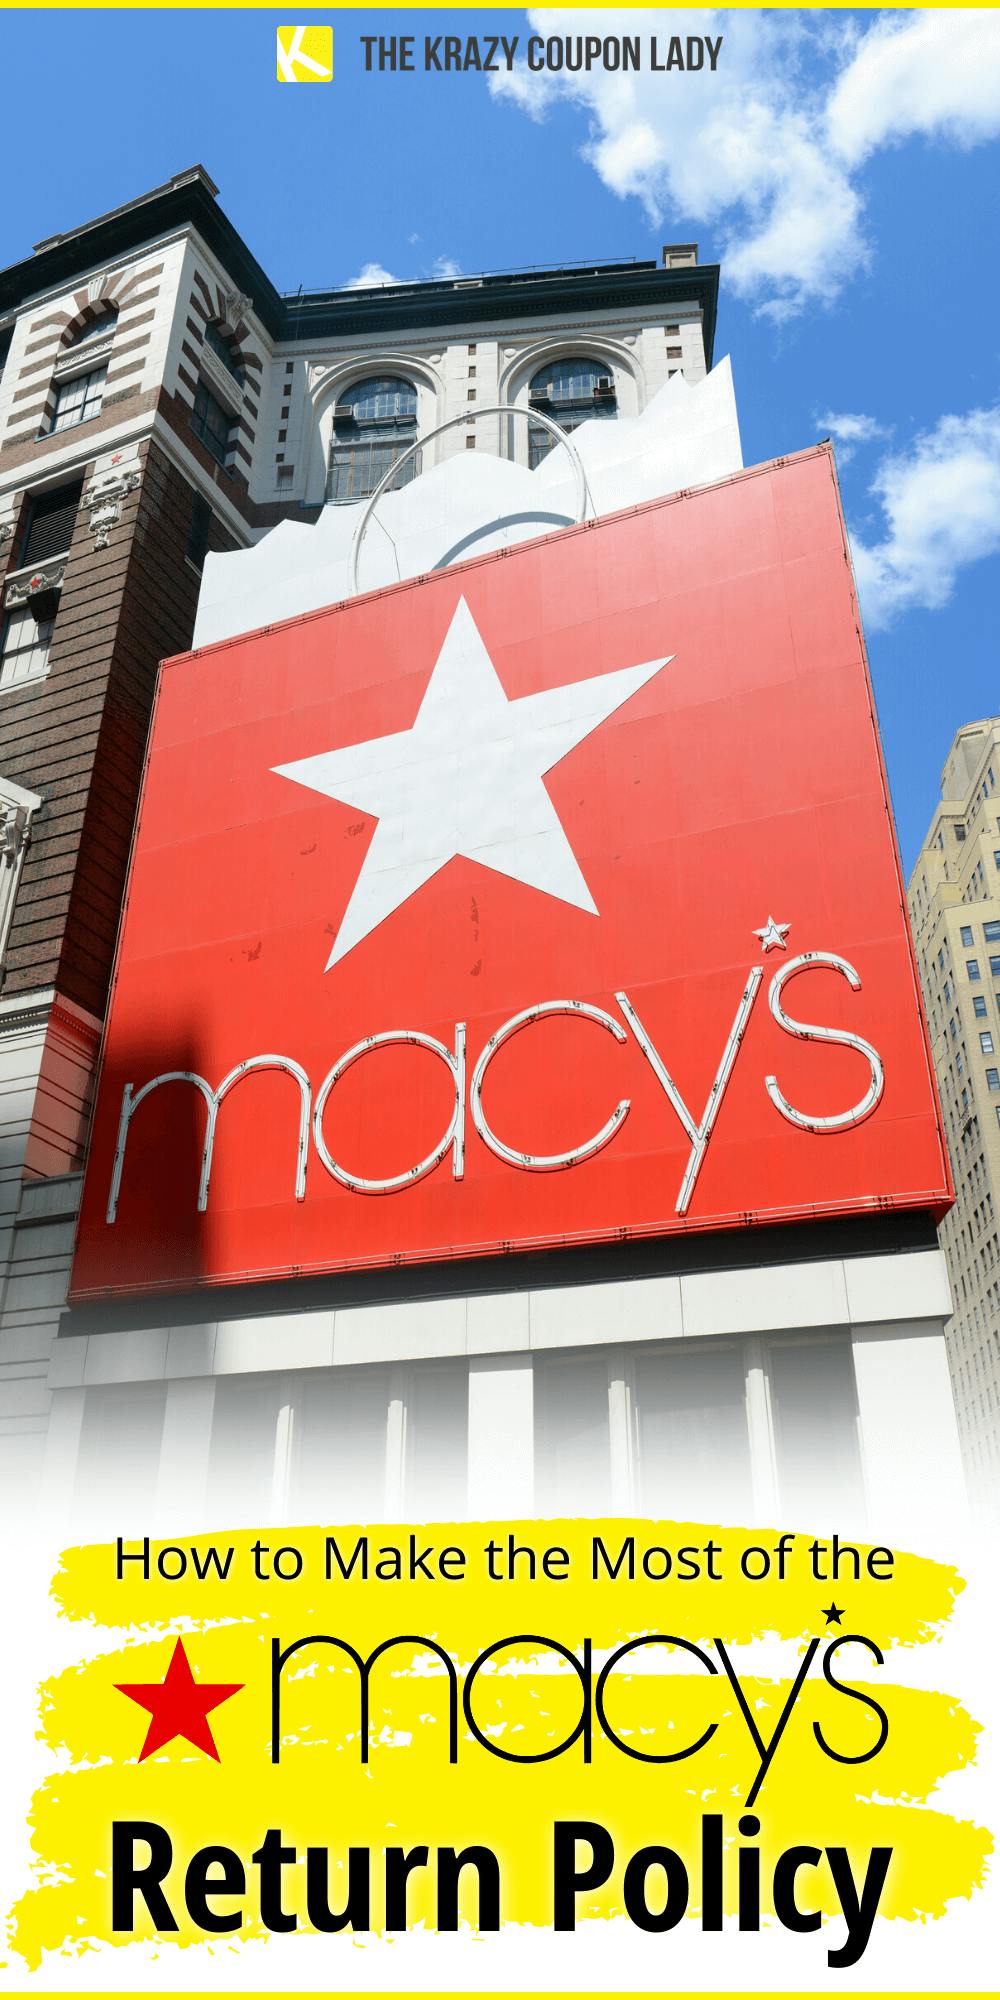 Macy's Return Policy Offers Free (and Honestly, Easy!) Returns